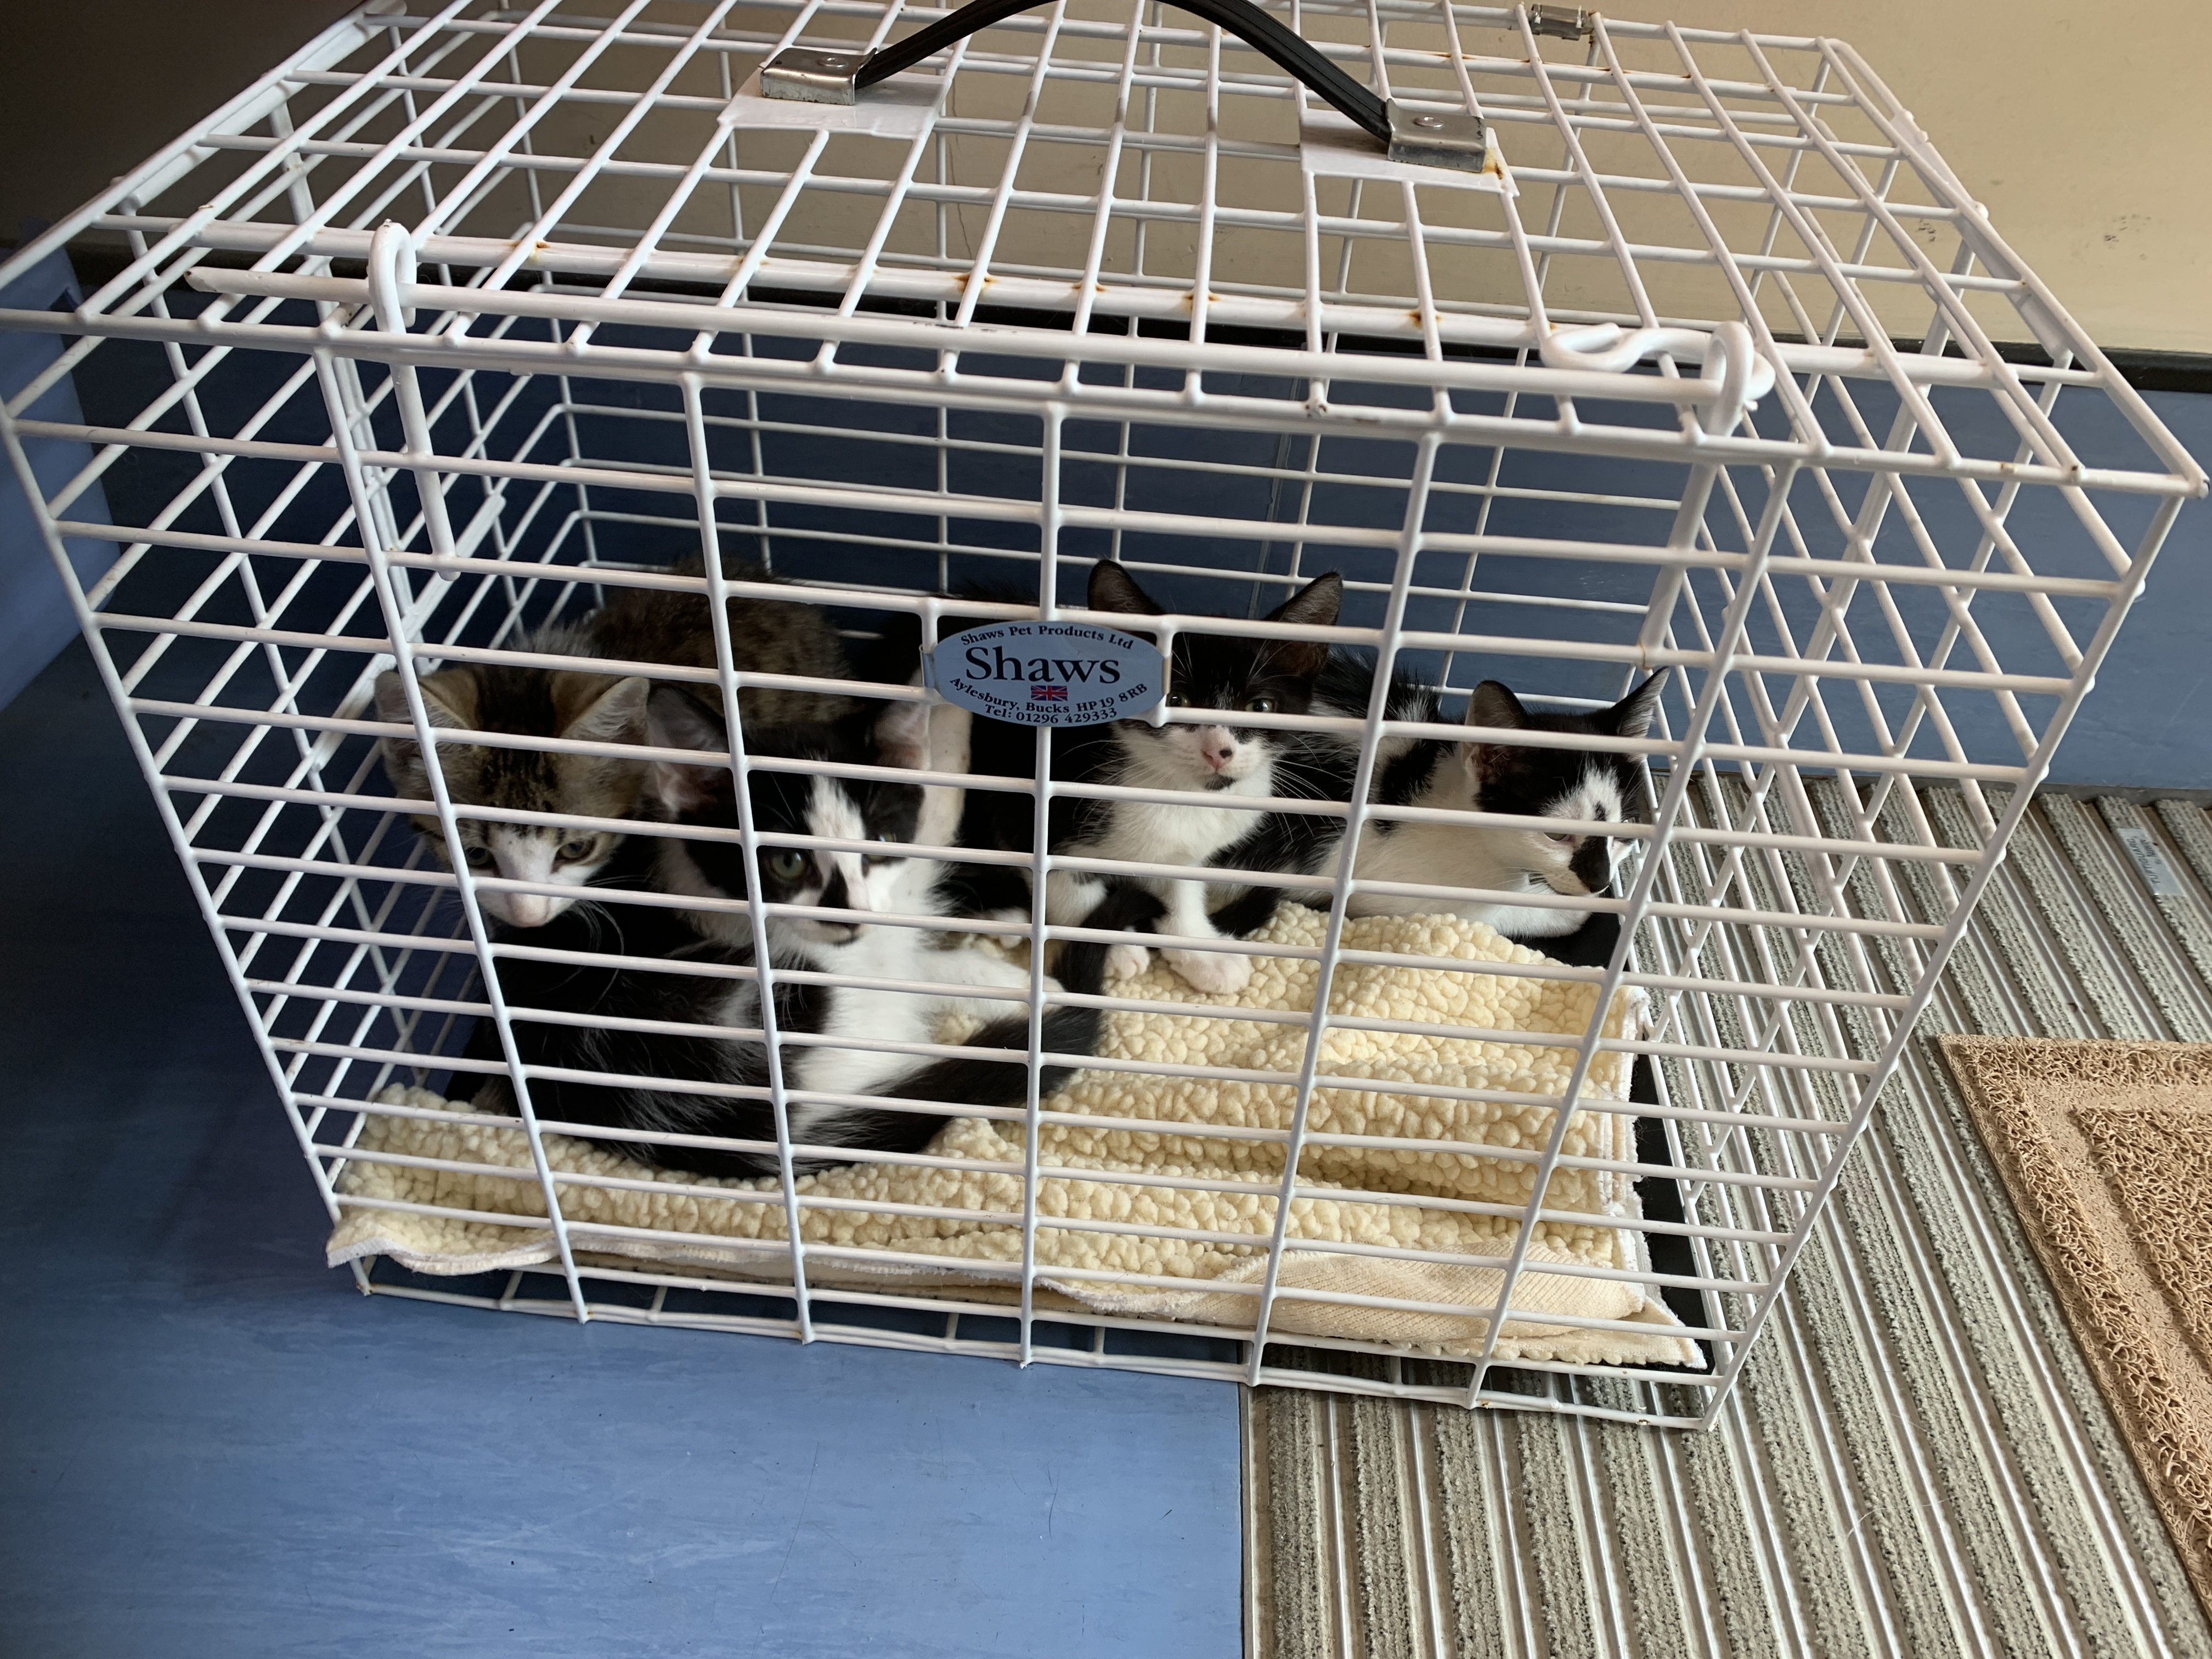 22 cats also had to be rescued from a house in Weston-super-Mare after an unneutered female had multiple litters of kittens